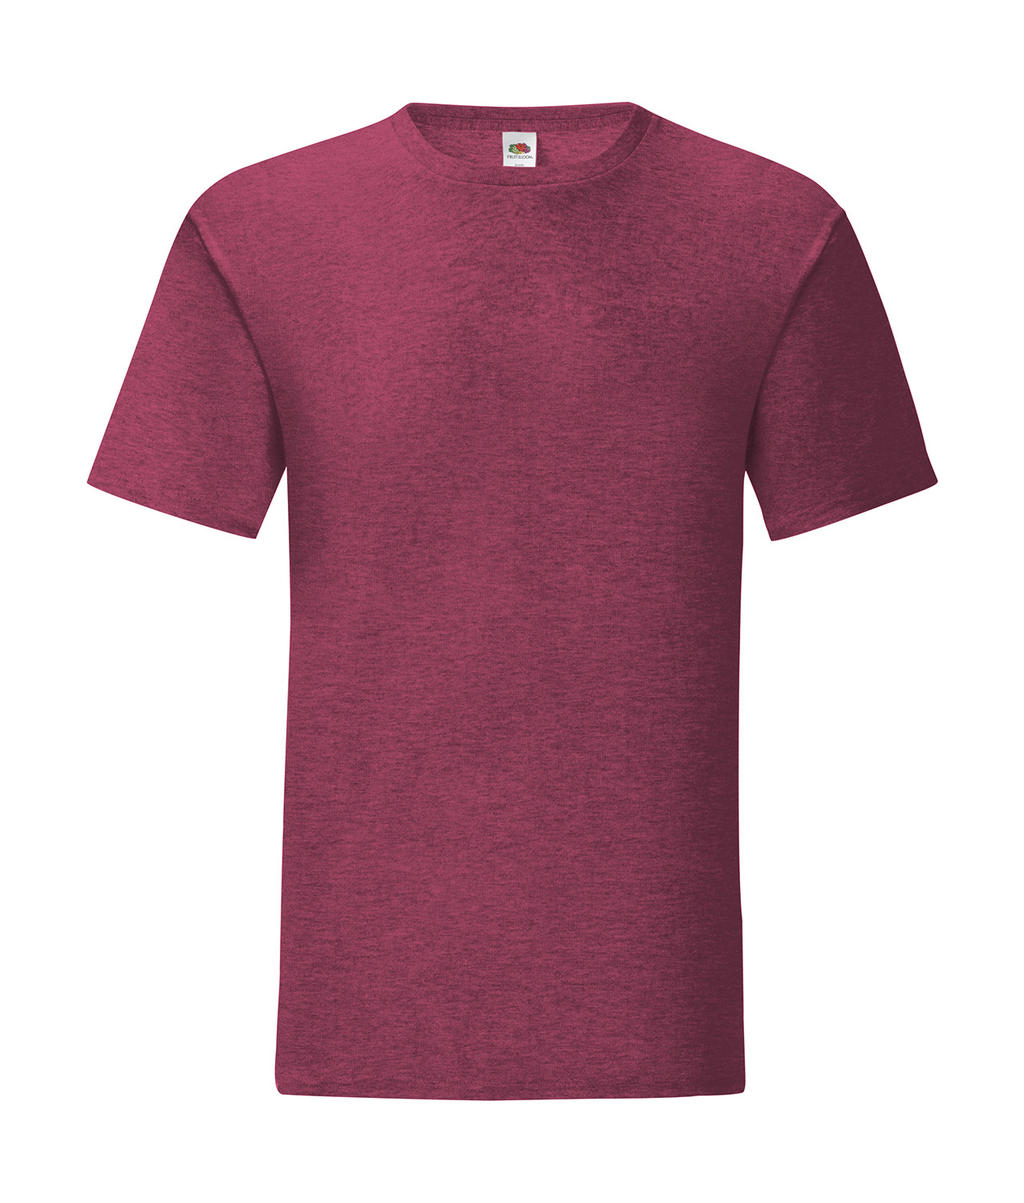  Iconic 150 T in Farbe Heather Burgundy